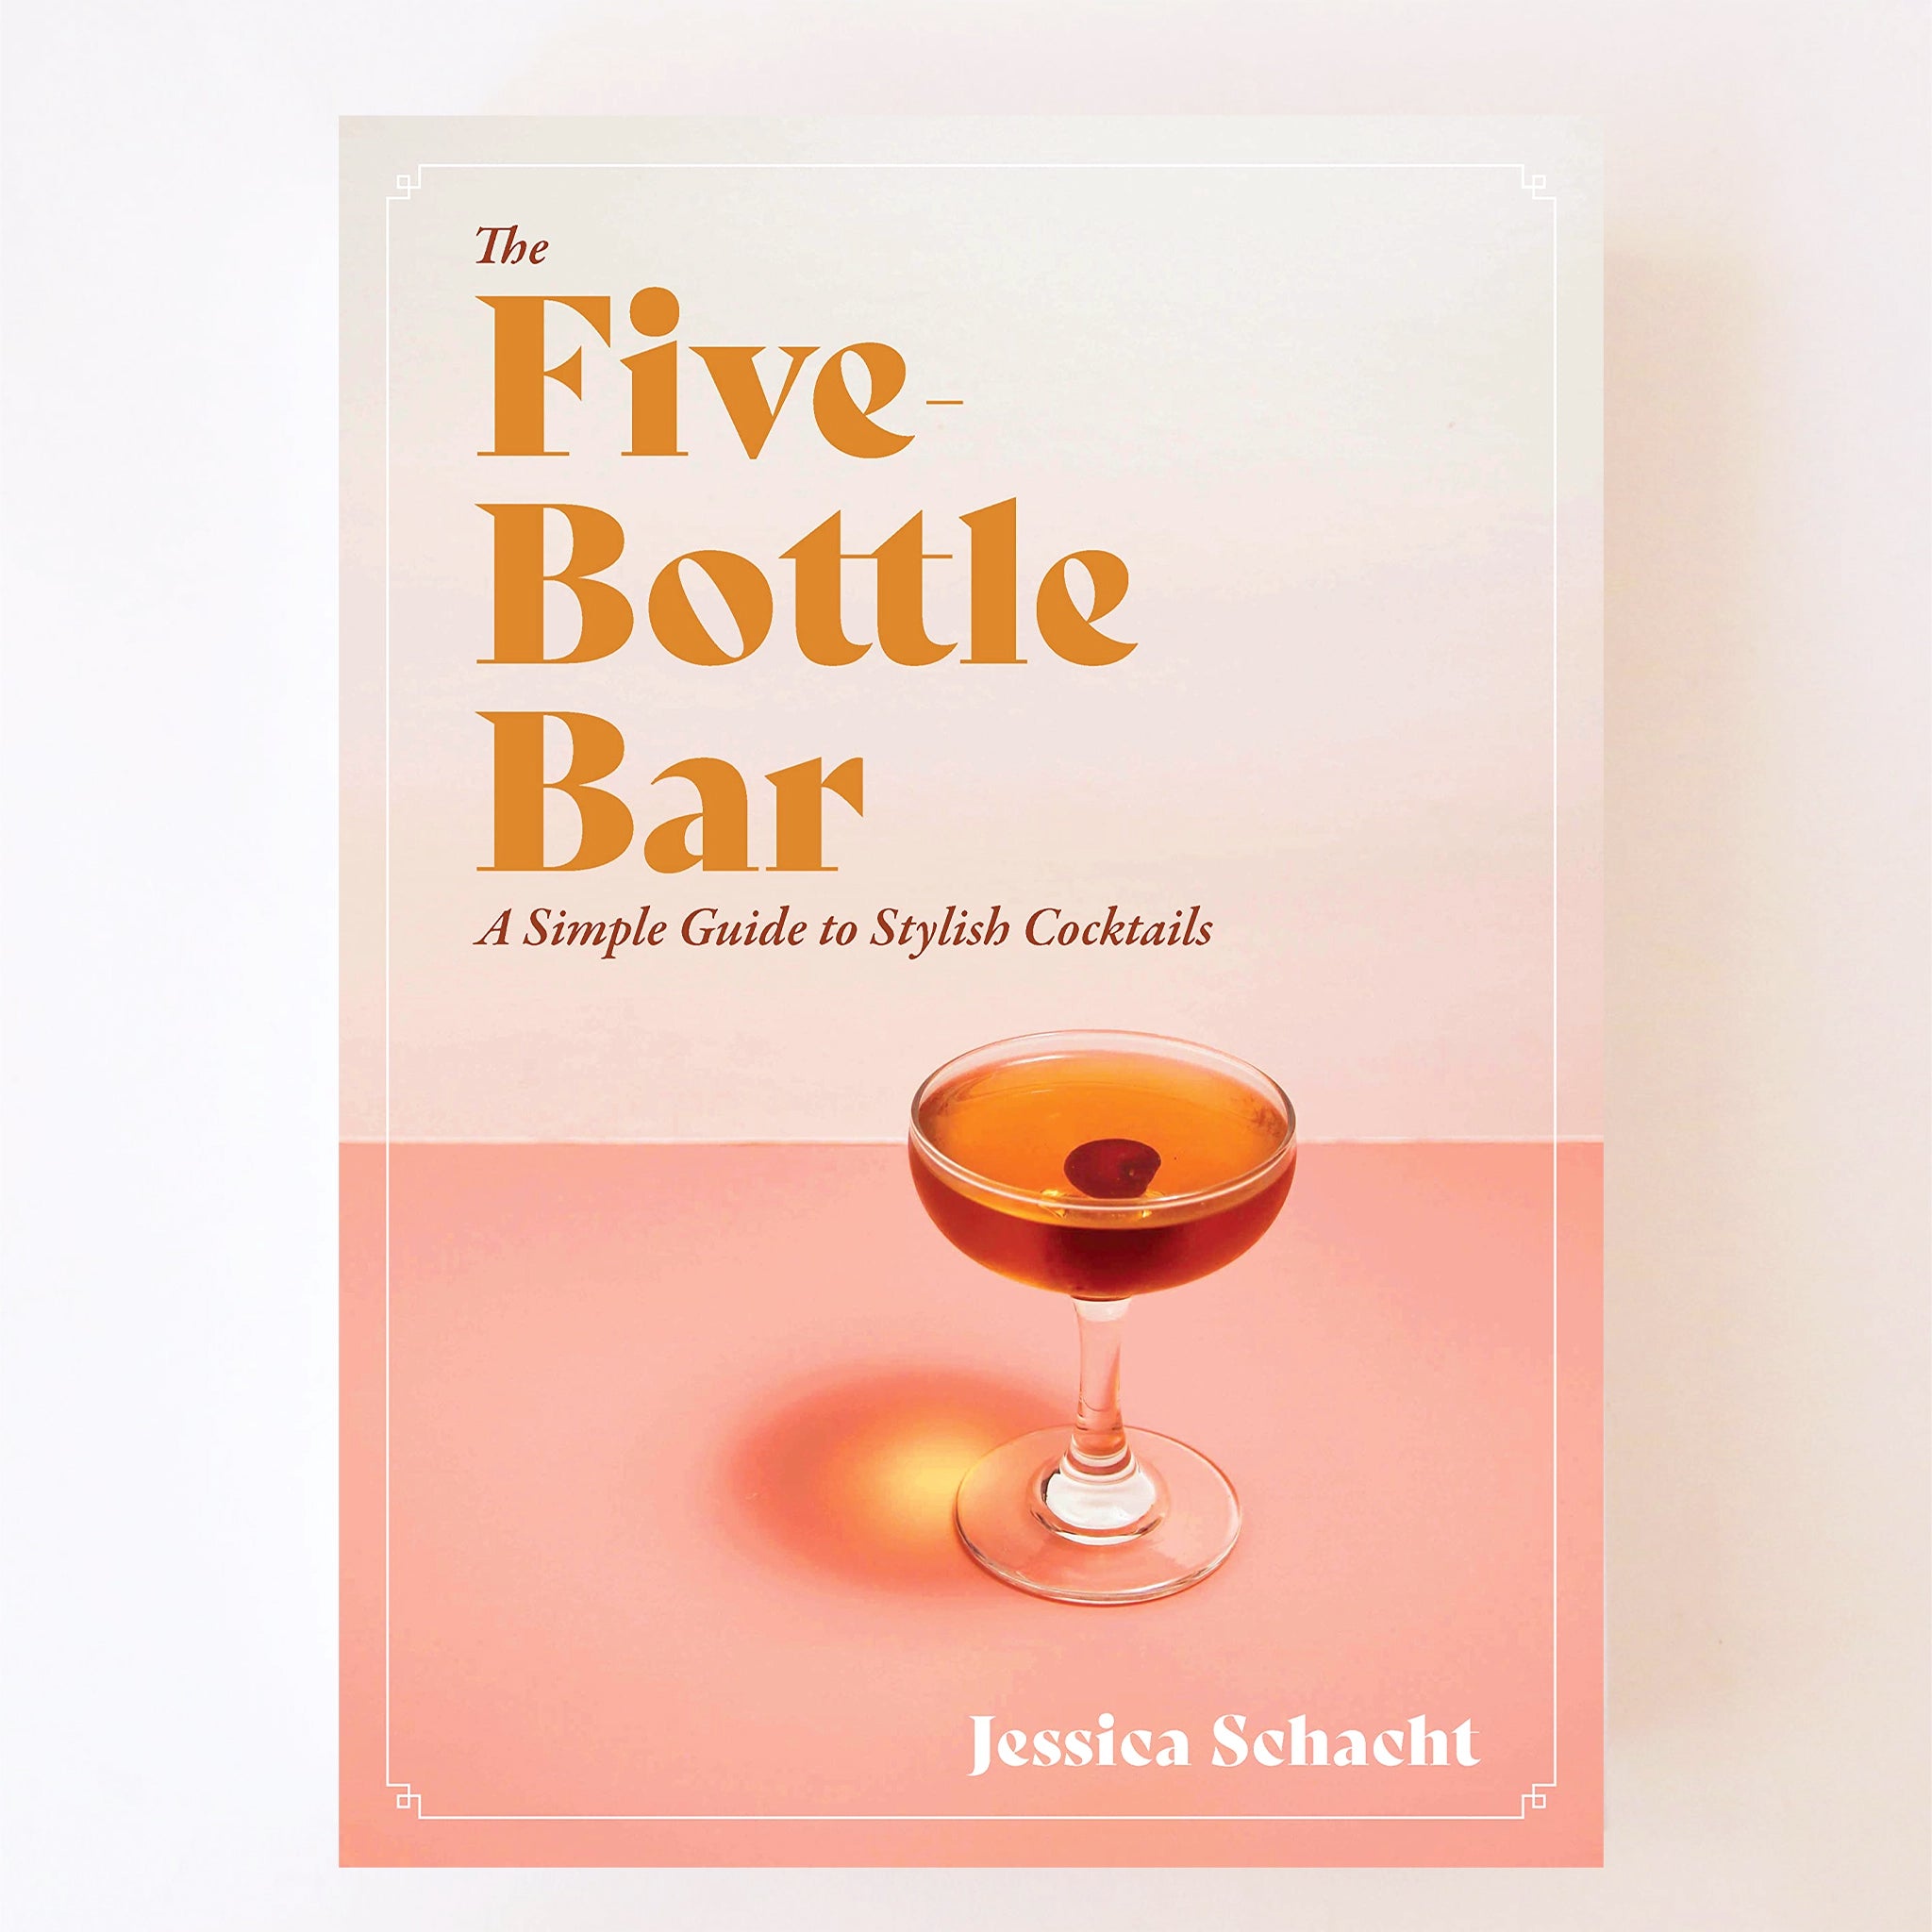 A cream and light pink book cover with a photograph of a coupe cocktail glass filled with an orange liquid along with orange text in the top left corner that reads, &quot;The Five Bottle Bar, A Simple Guide to Stylish Cocktails&quot;.